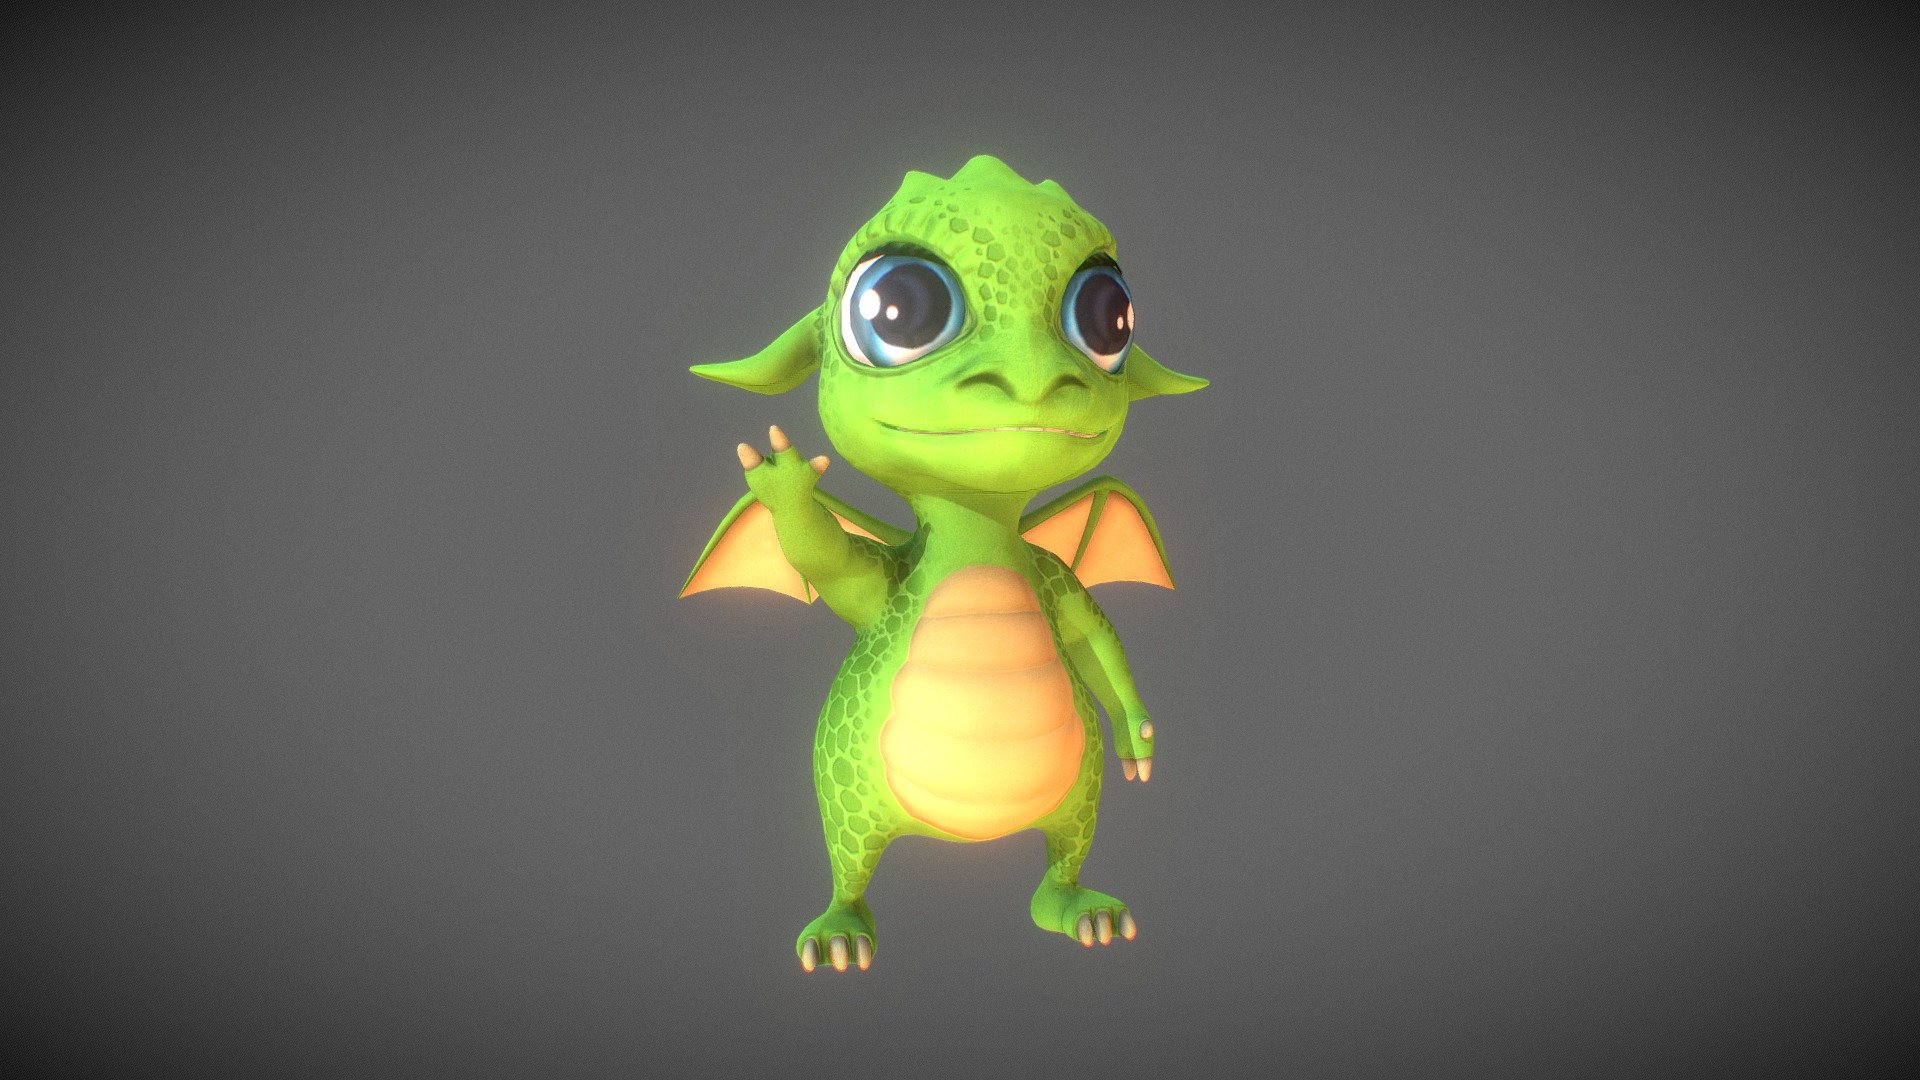 Model made for mobile app based on own design. Modeled, rigged and animated in Blender, textured in Photoshop 3d model